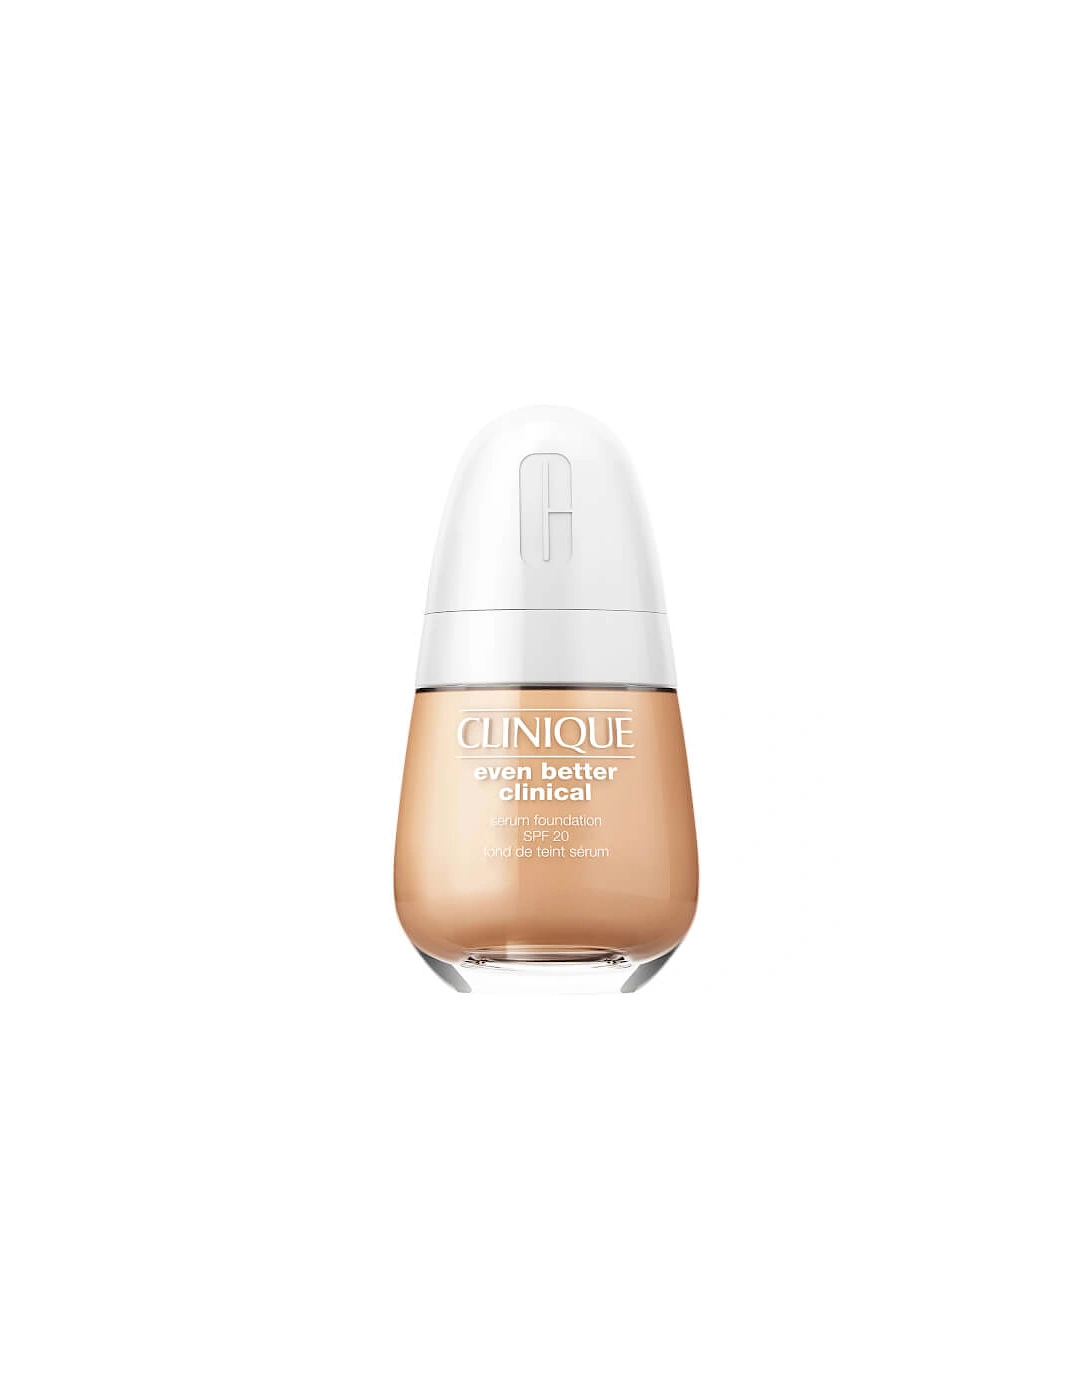 Even Better Clinical Serum Foundation SPF20 - Biscuit, 2 of 1